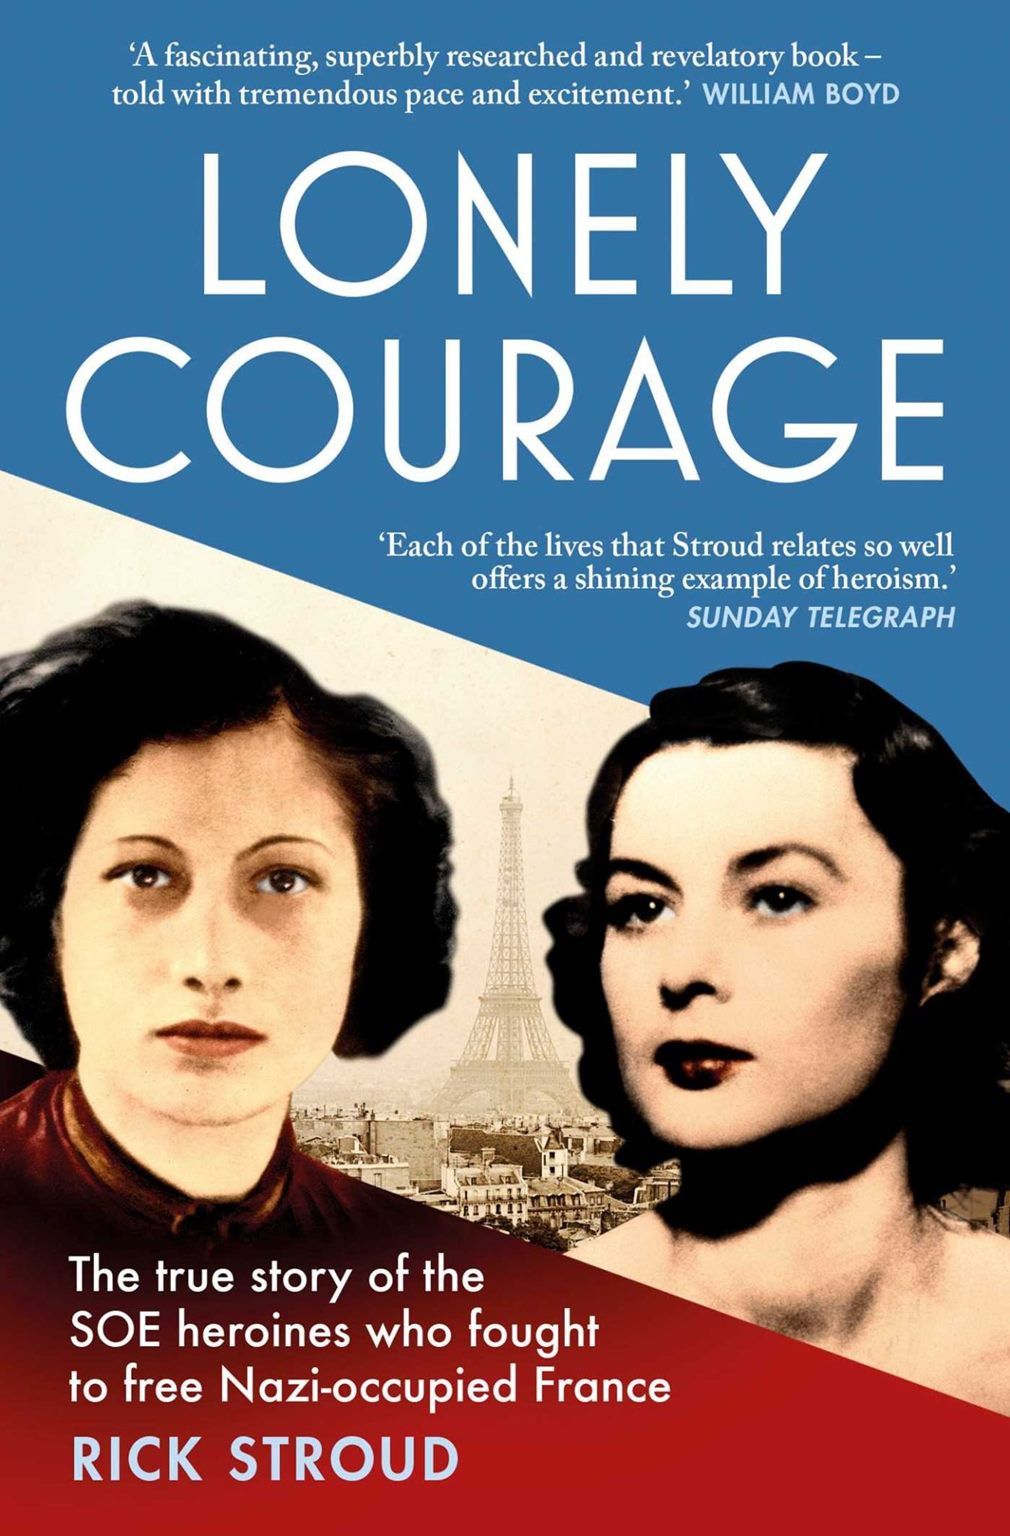 LONELY COURAGE: The SOE Heroines in Nazi occupied France